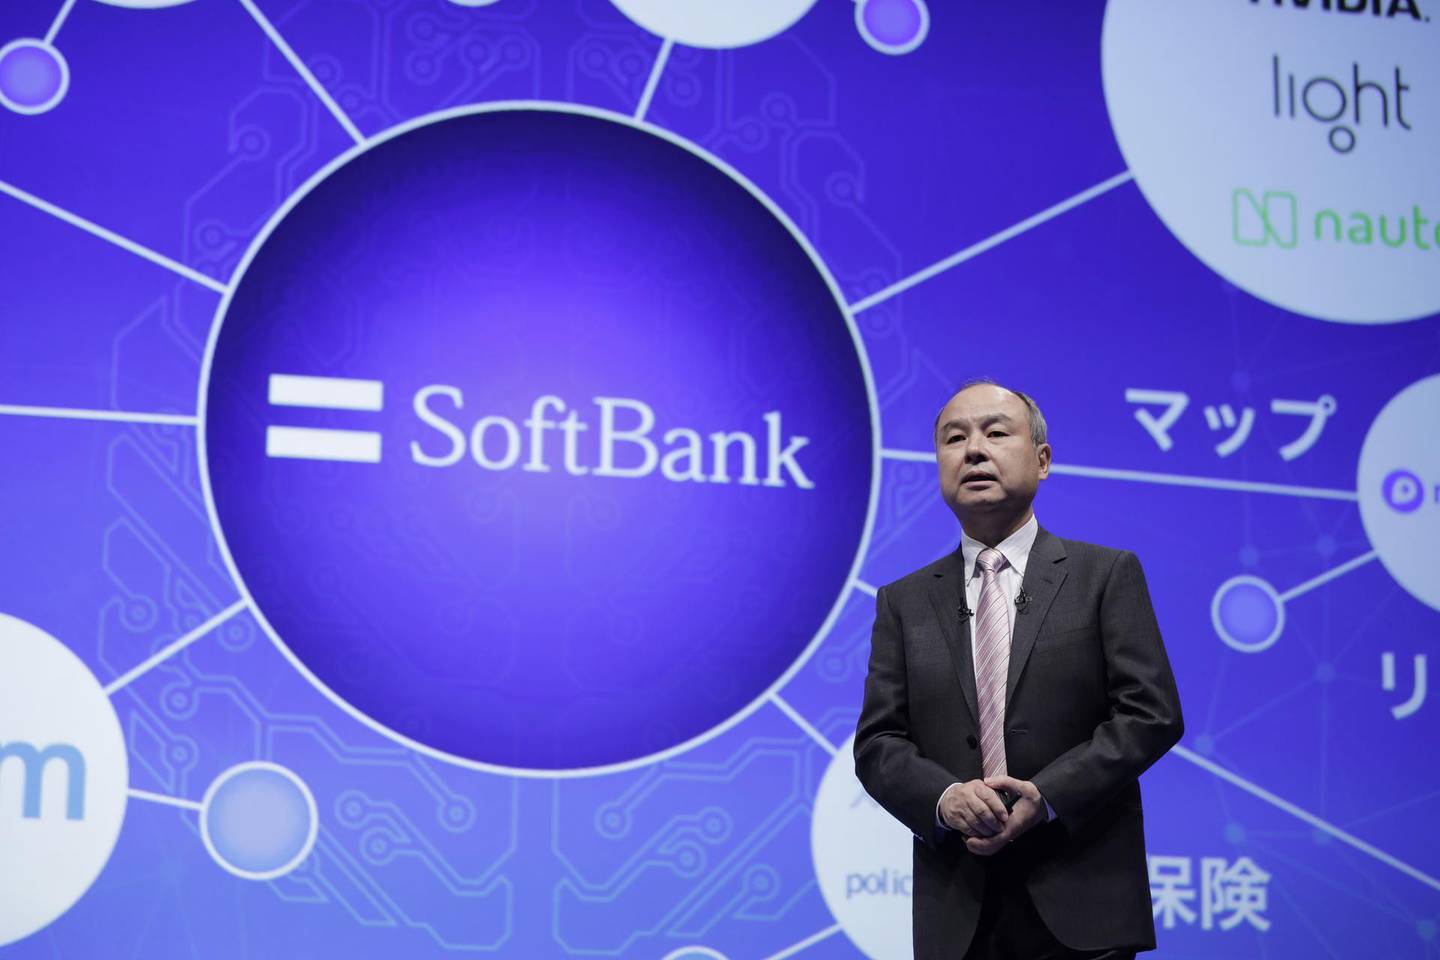 Masayoshi Son, chairman and chief executive officer of SoftBank Group Corp., speaks during a news conference in Tokyo, Japan, on Thursday, Oct. 4, 2018. Japan's SoftBank and Toyota Motor Corp. are teaming up on ride-hailing and self-driving cars as they accelerate their push into a market dominated by U.S. technology and car companies. Photographer: Kiyoshi Ota/Bloomberg